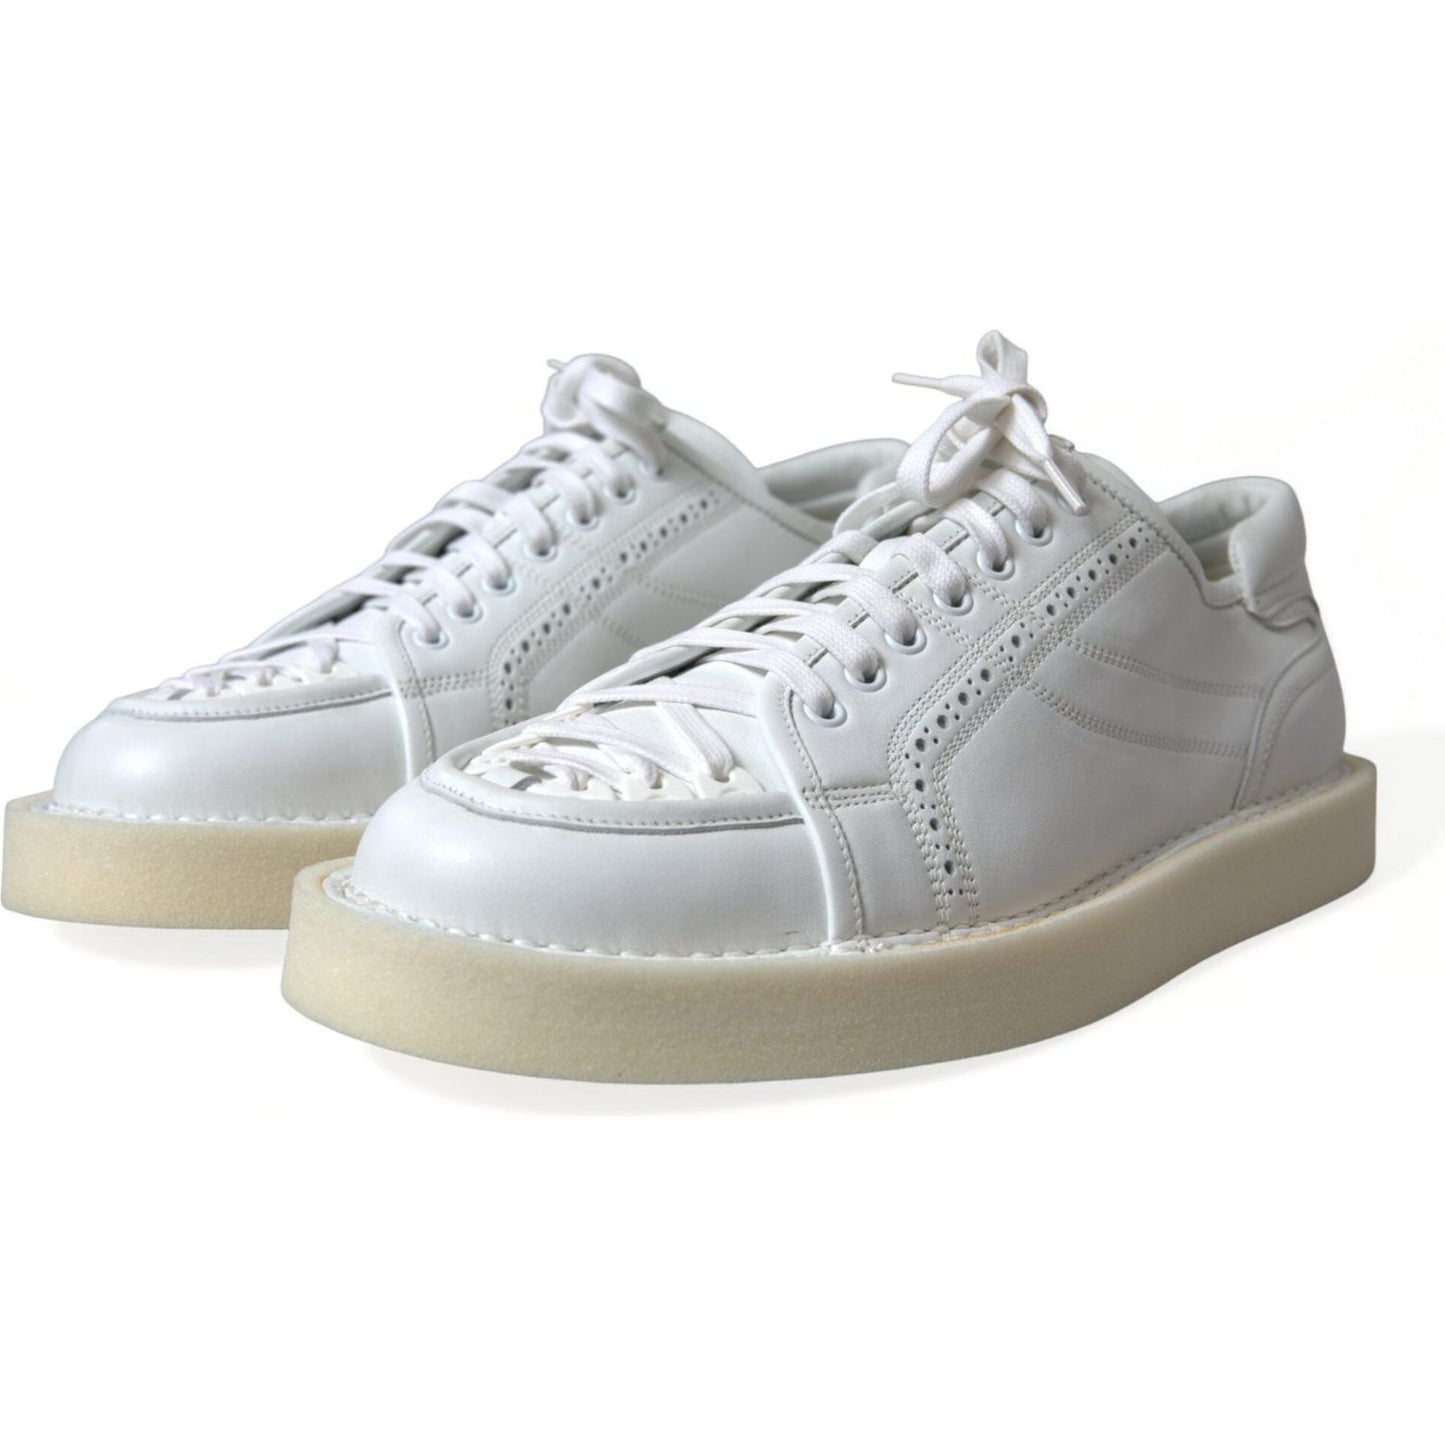 Dolce & Gabbana Elegant White Calfskin Oxford Sneakers white-leather-low-top-oxford-sneakers-shoes